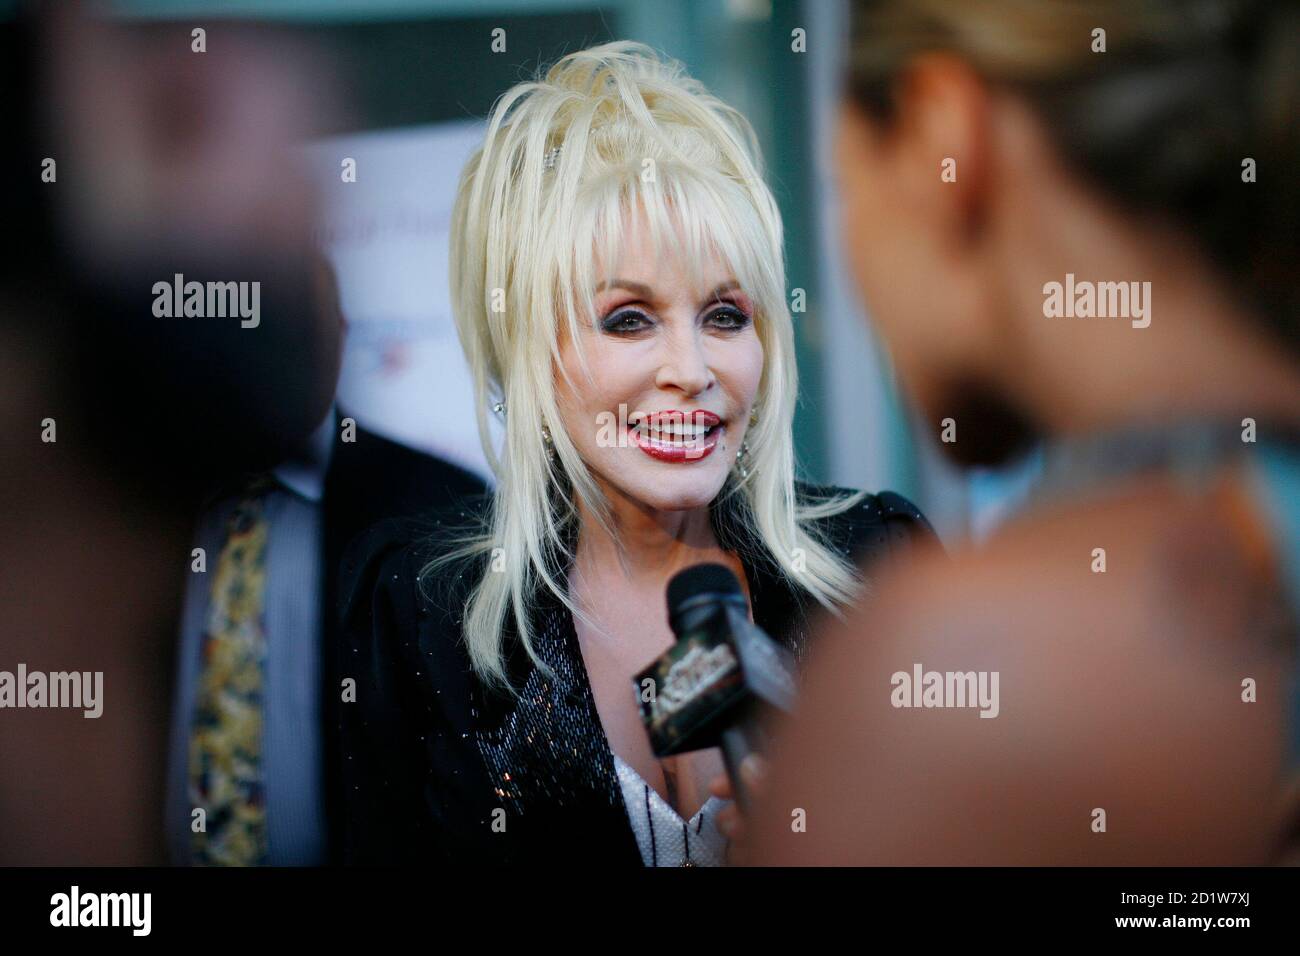 Composer and lyricist Dolly Parton is interviewed at the opening night of '9 to 5: The Musical' at the Ahmanson theatre in Los Angeles September 20, 2008.    REUTERS/Mario Anzuoni   (UNITED STATES) Stock Photo